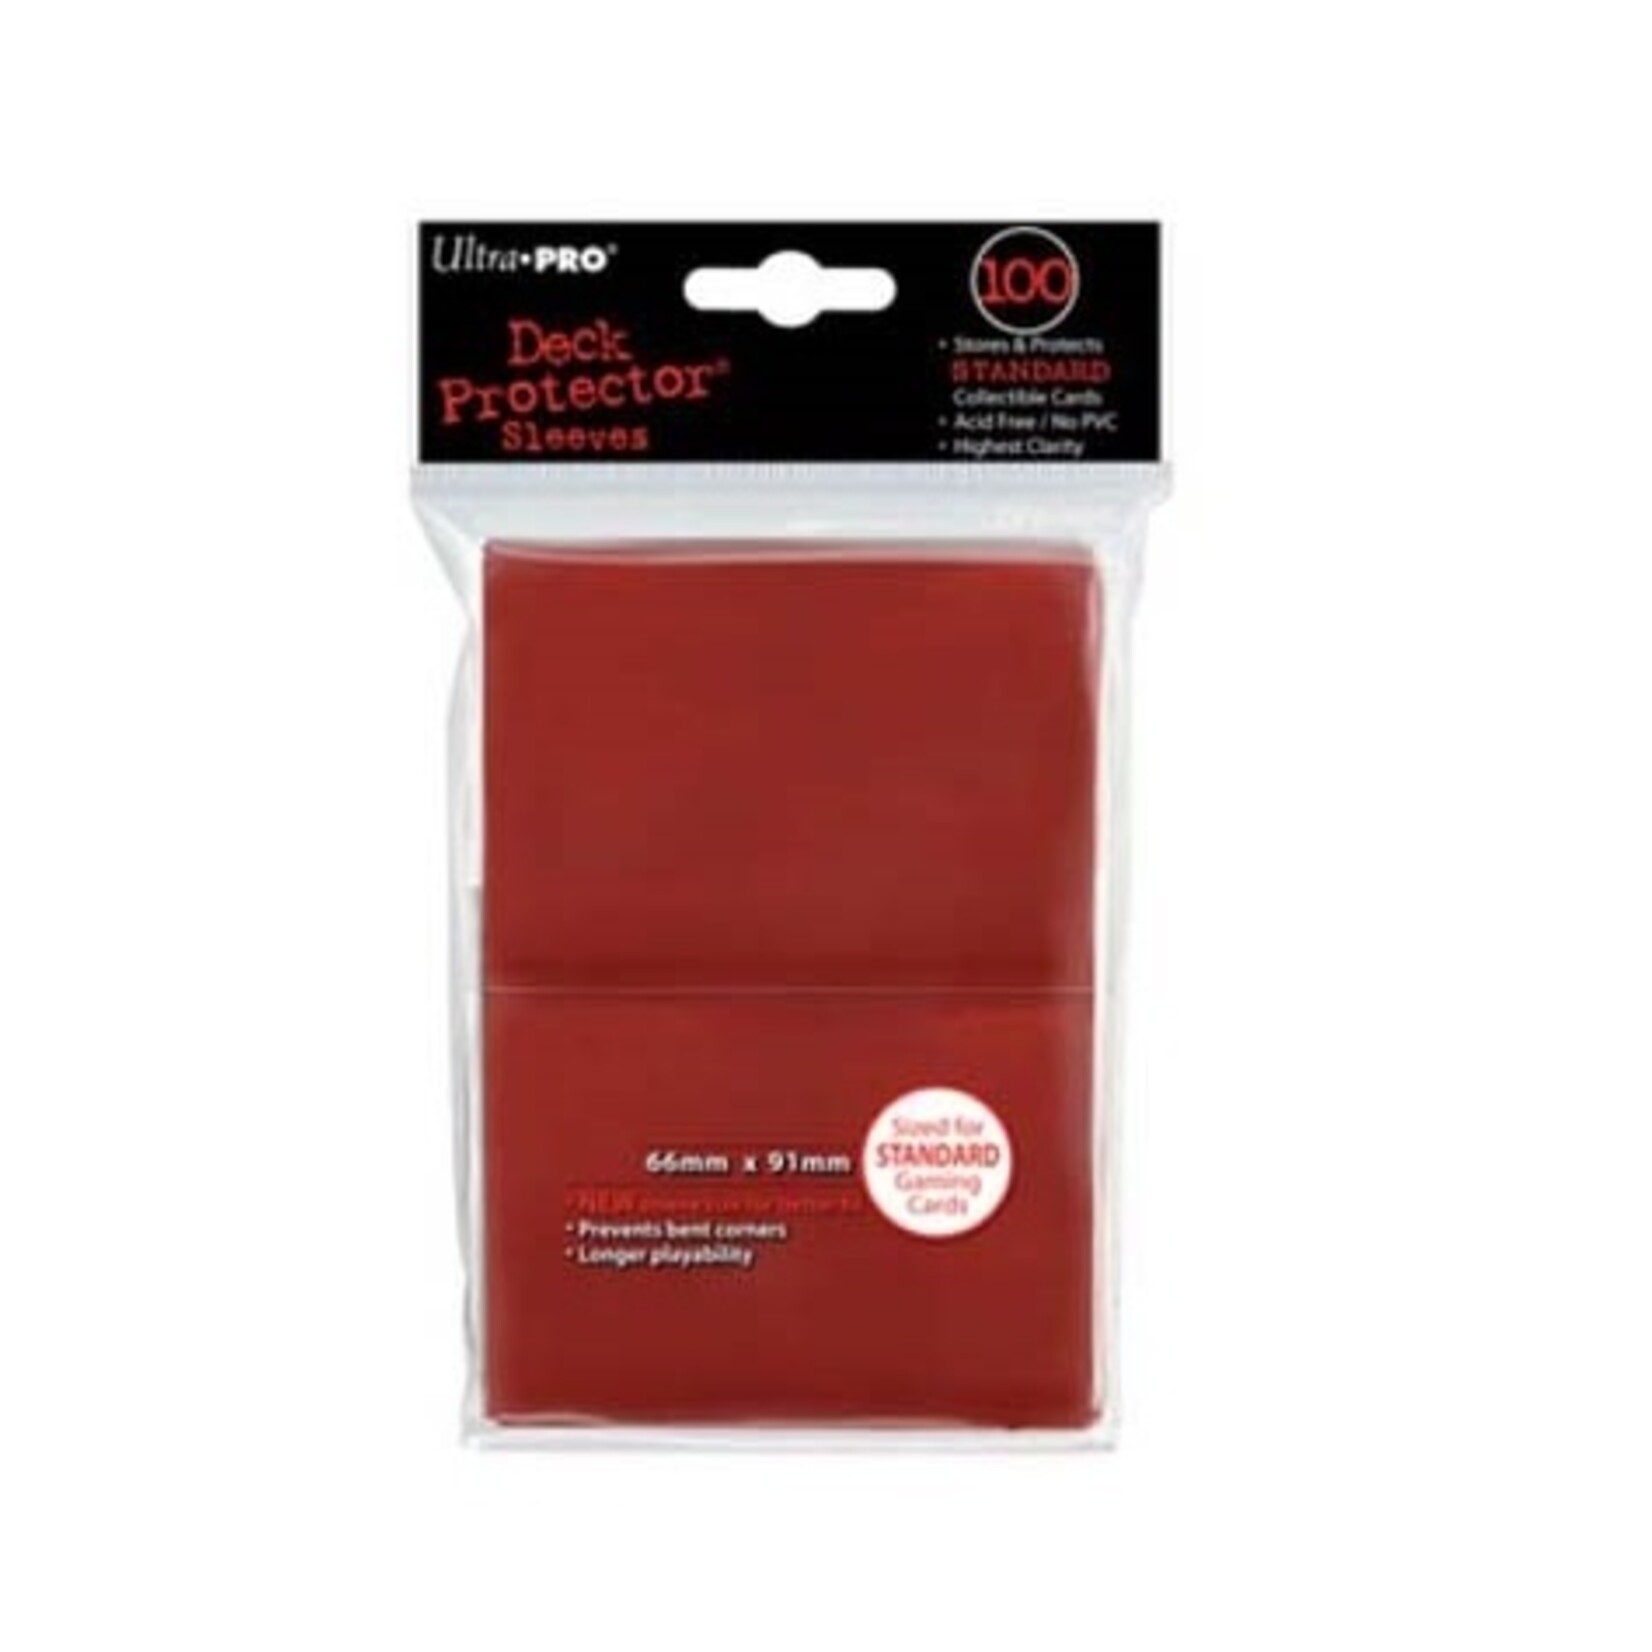 Ultra-Pro Deck Protector sleeves - Pro Matte - Rouge (100)